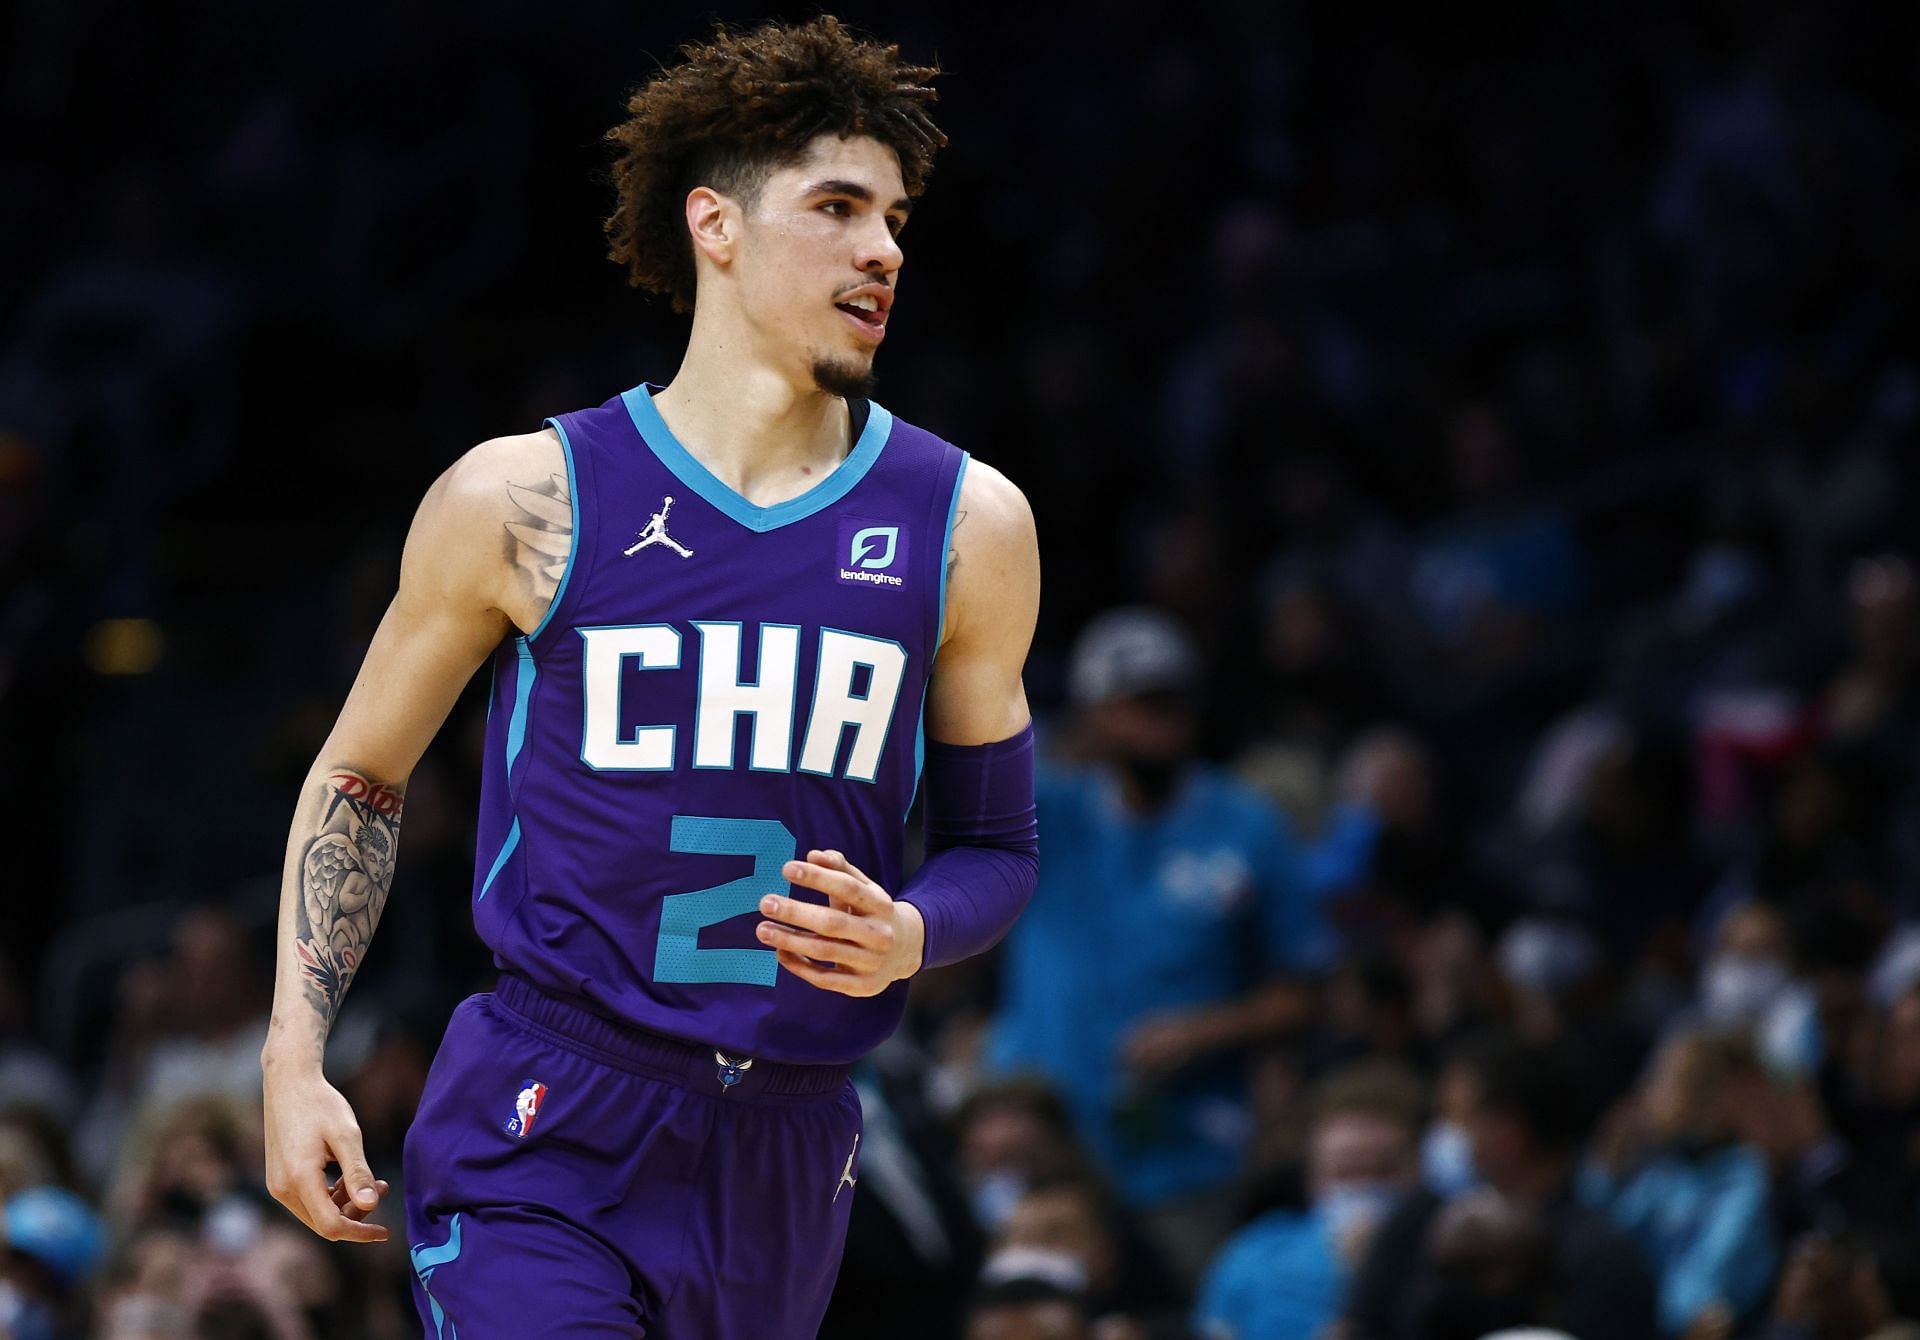 LaMelo Ball of the Charlotte Hornets runs the court following a basket against the Indiana Pacers.